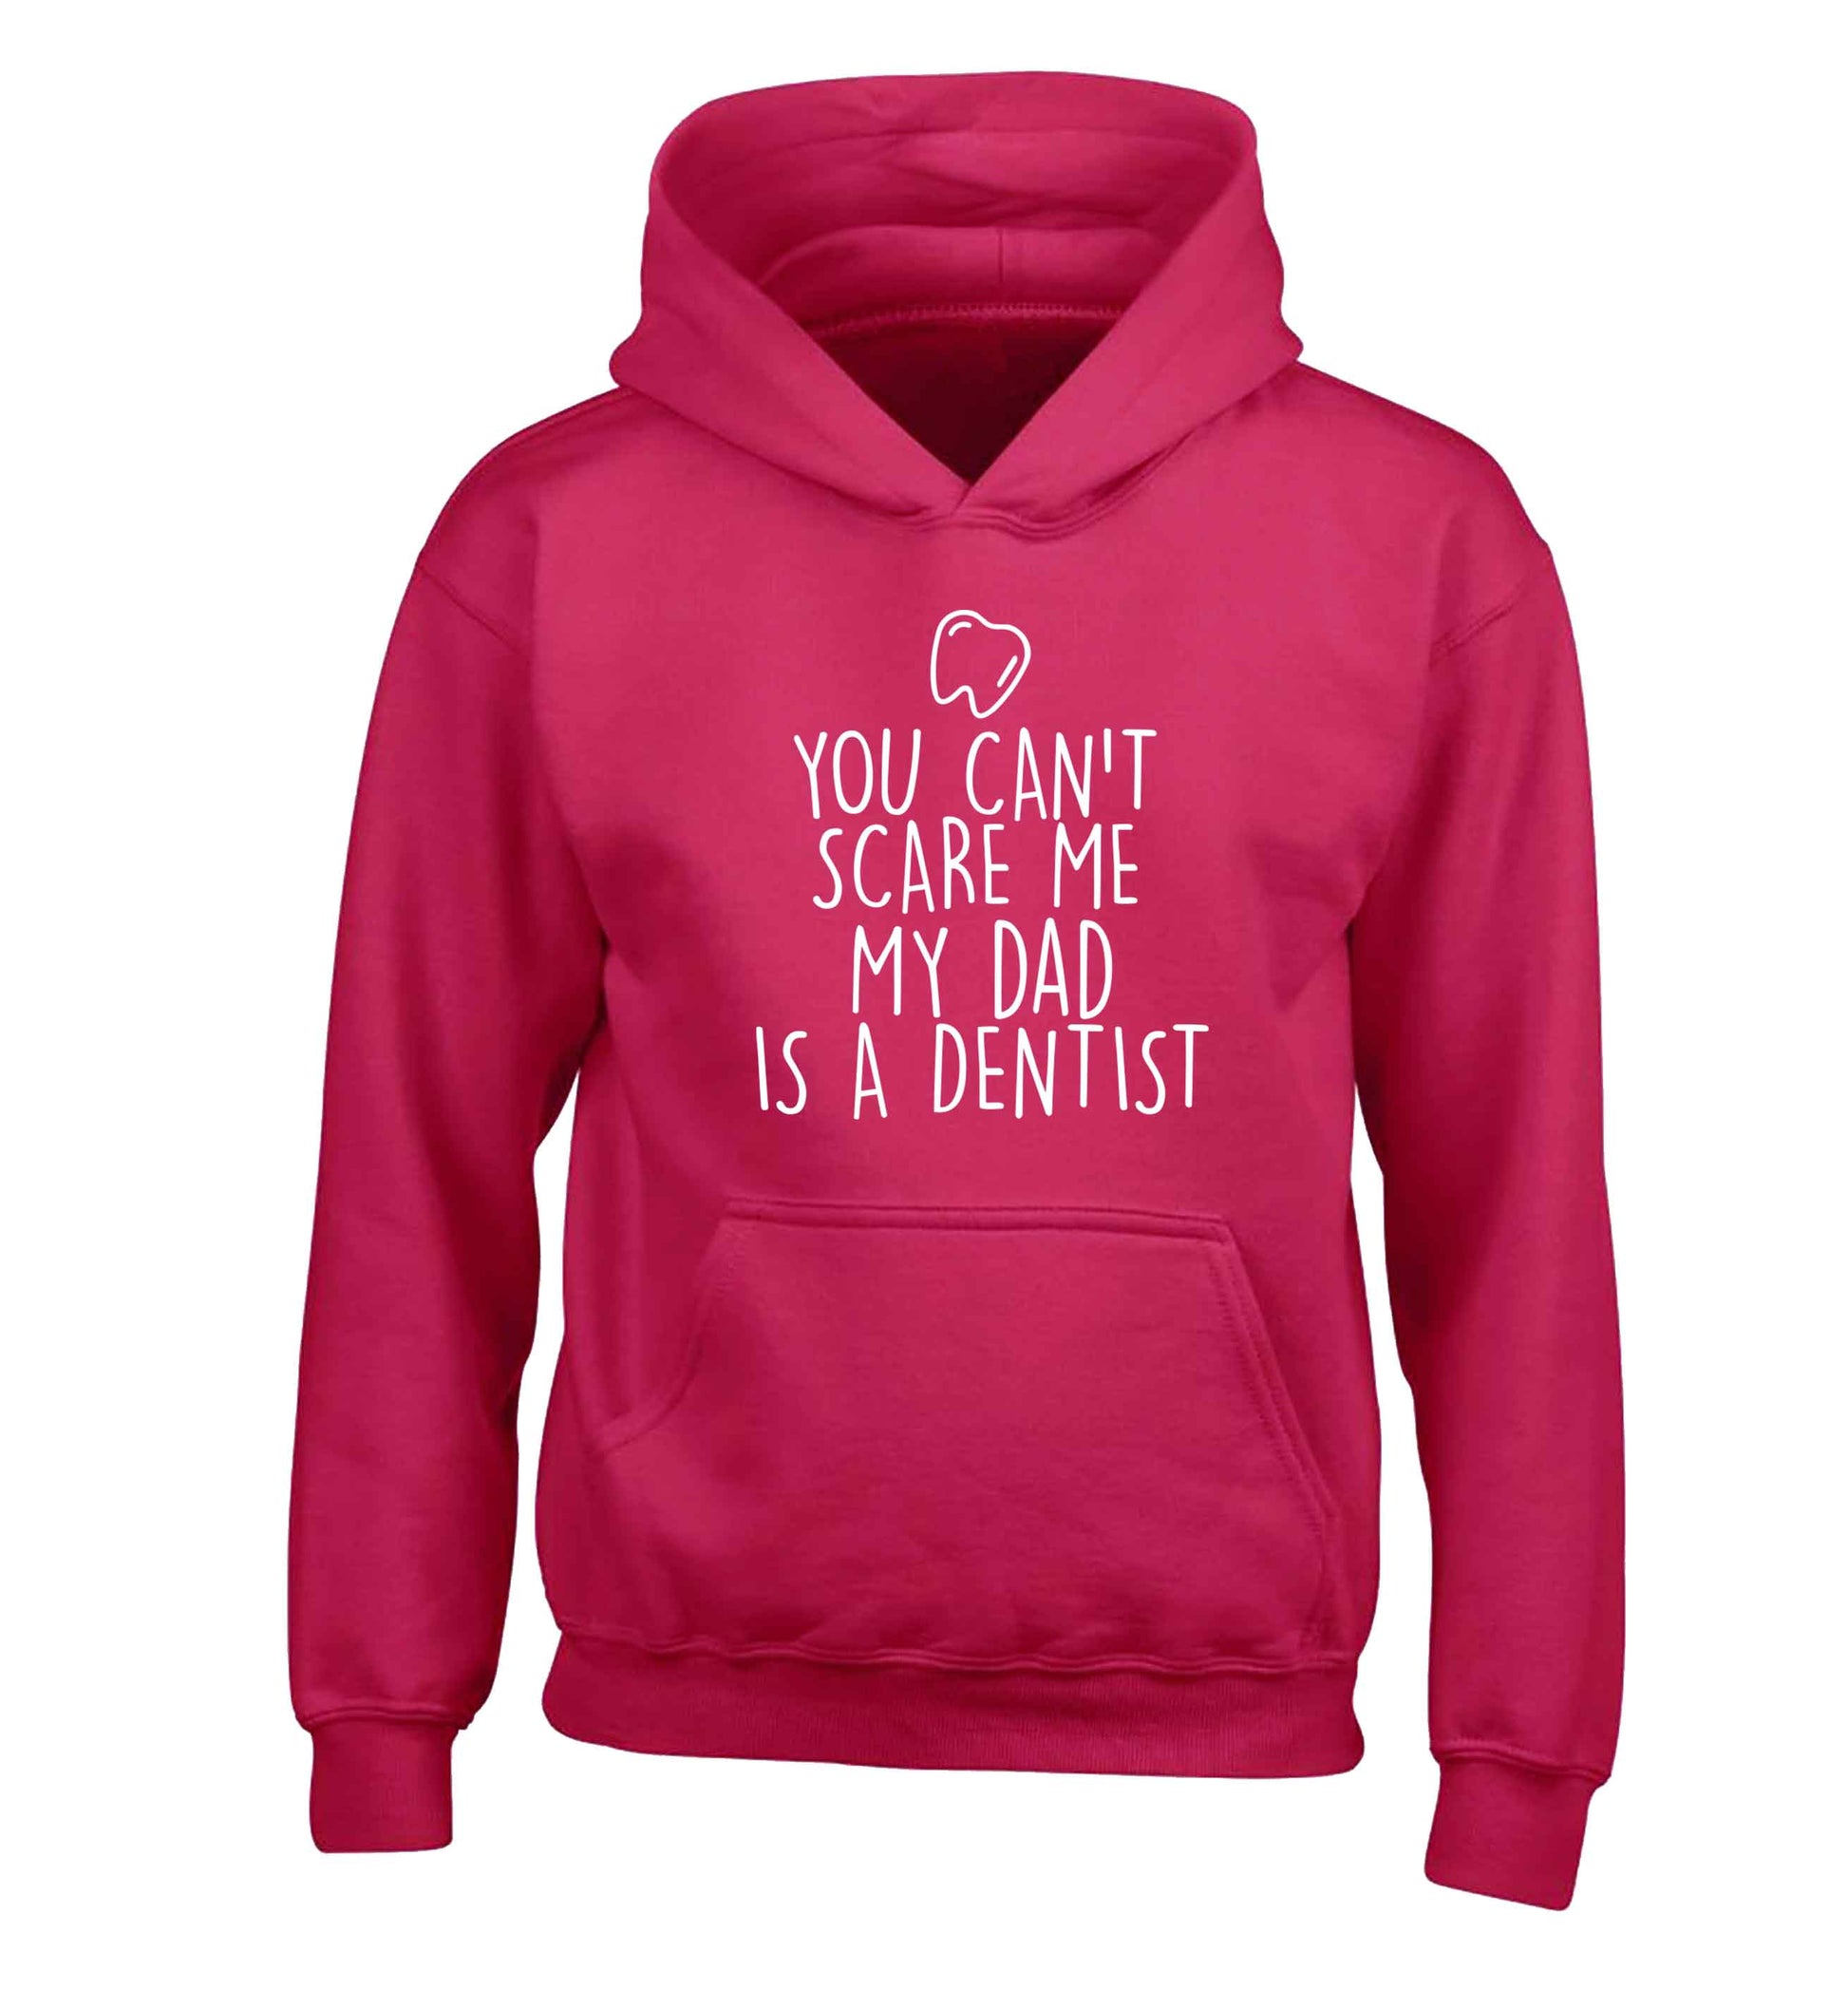 You can't scare me my dad is a dentist children's pink hoodie 12-13 Years